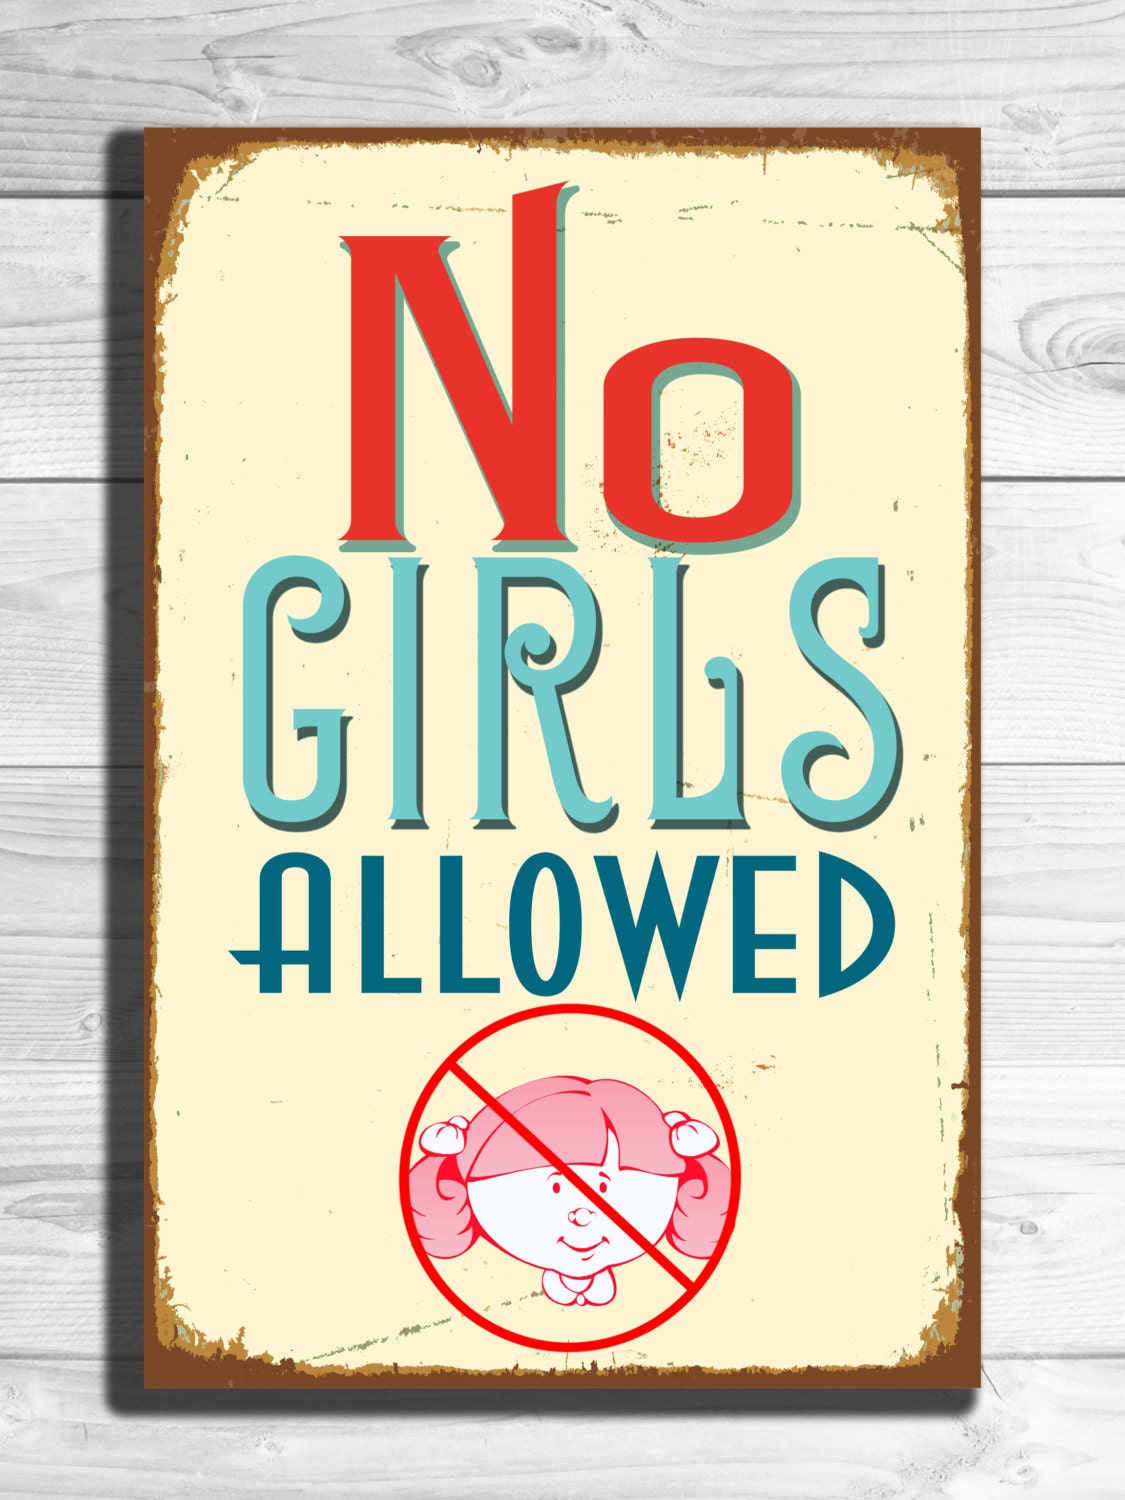 Not allowed speed. No girls allowed. Only girls allow sign. Only boy allow sign.